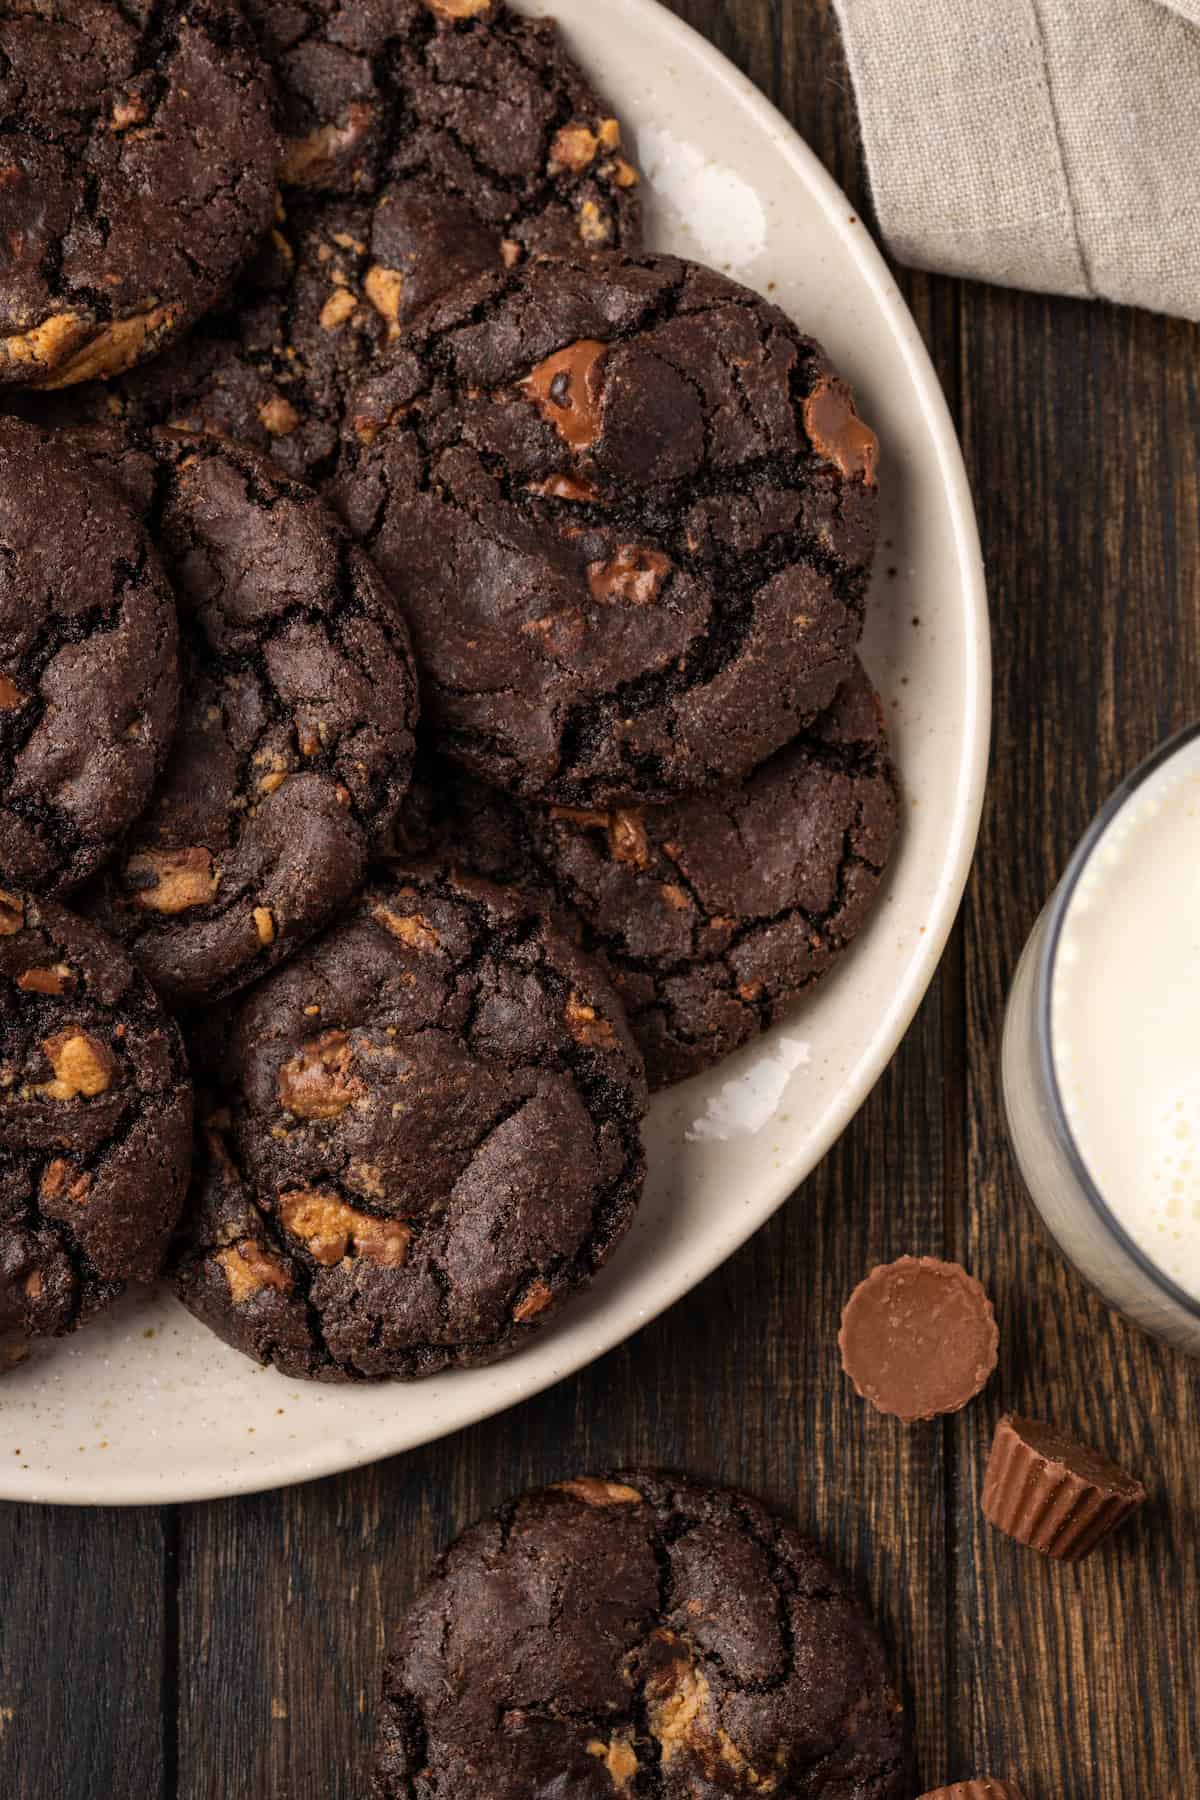 Overhead view of a pile of peanut butter chocolate cookies arranged on a white plate, next to a glass of milk.